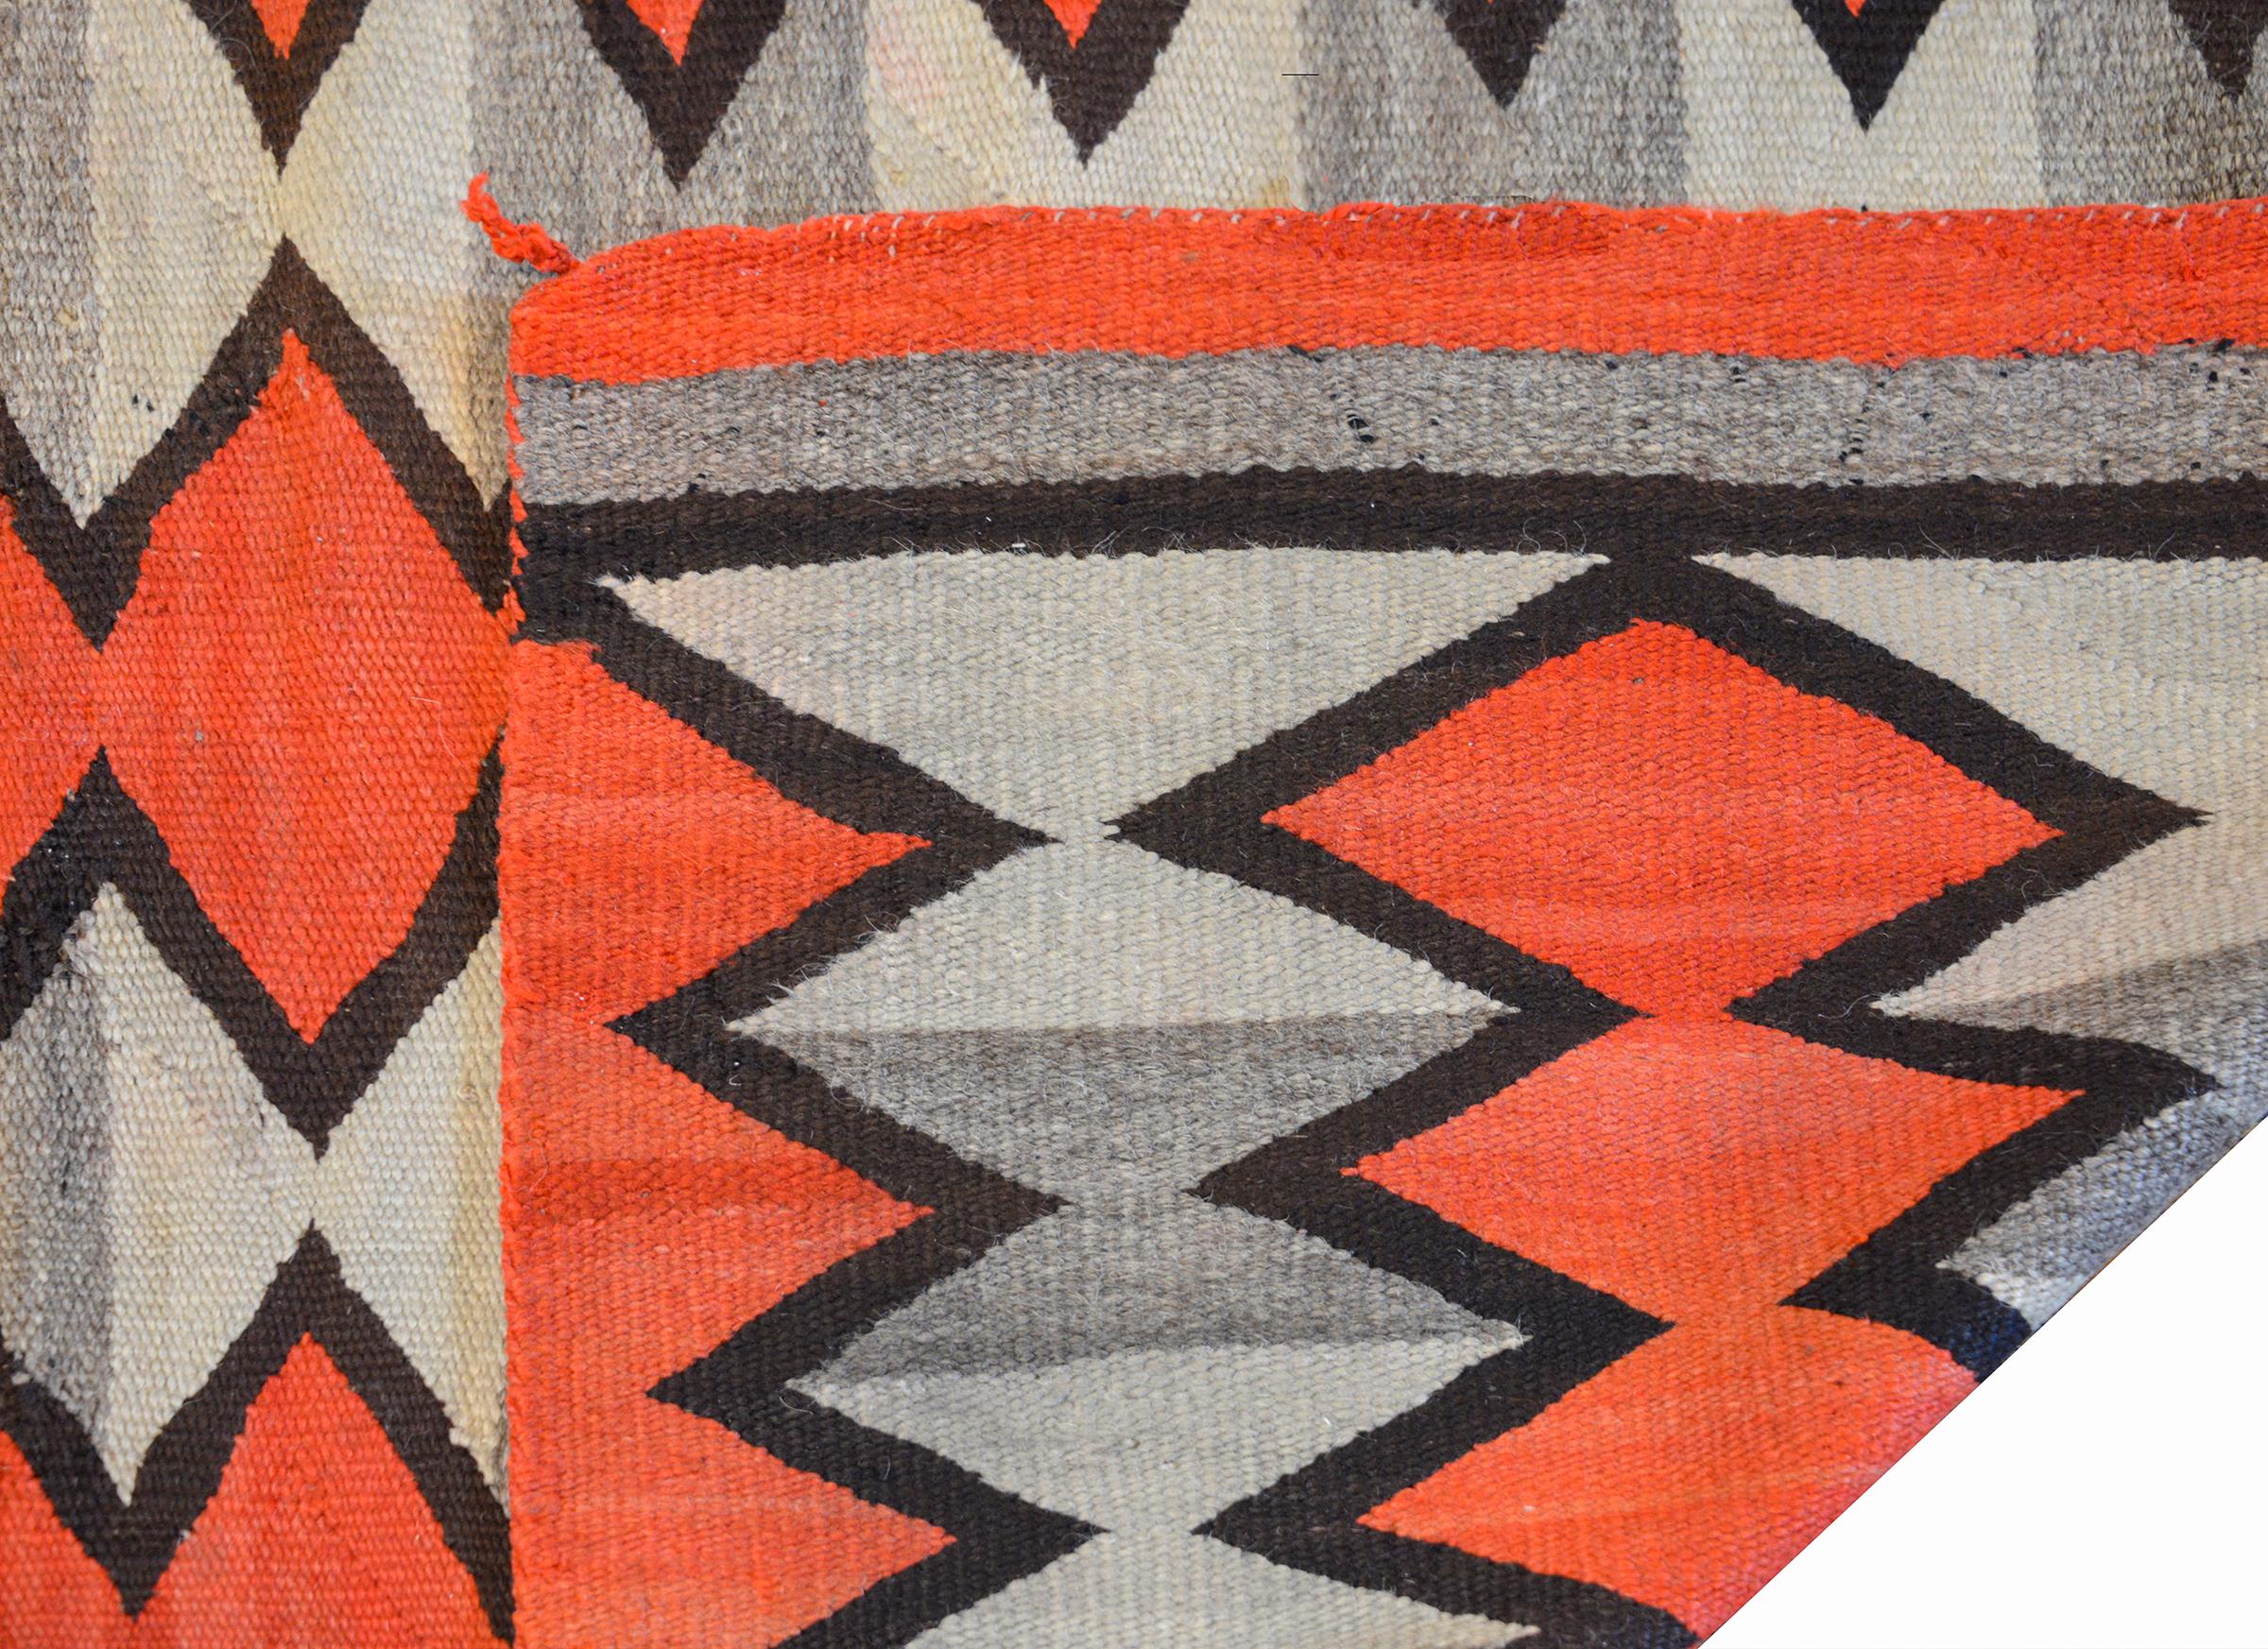 An exceptional early 20th century Navajo rug with a two grey striped background overlaid with several abrash crimson zigzag stripes flanked by thick black stripes. The ends are striped with crimson, grey, and black.